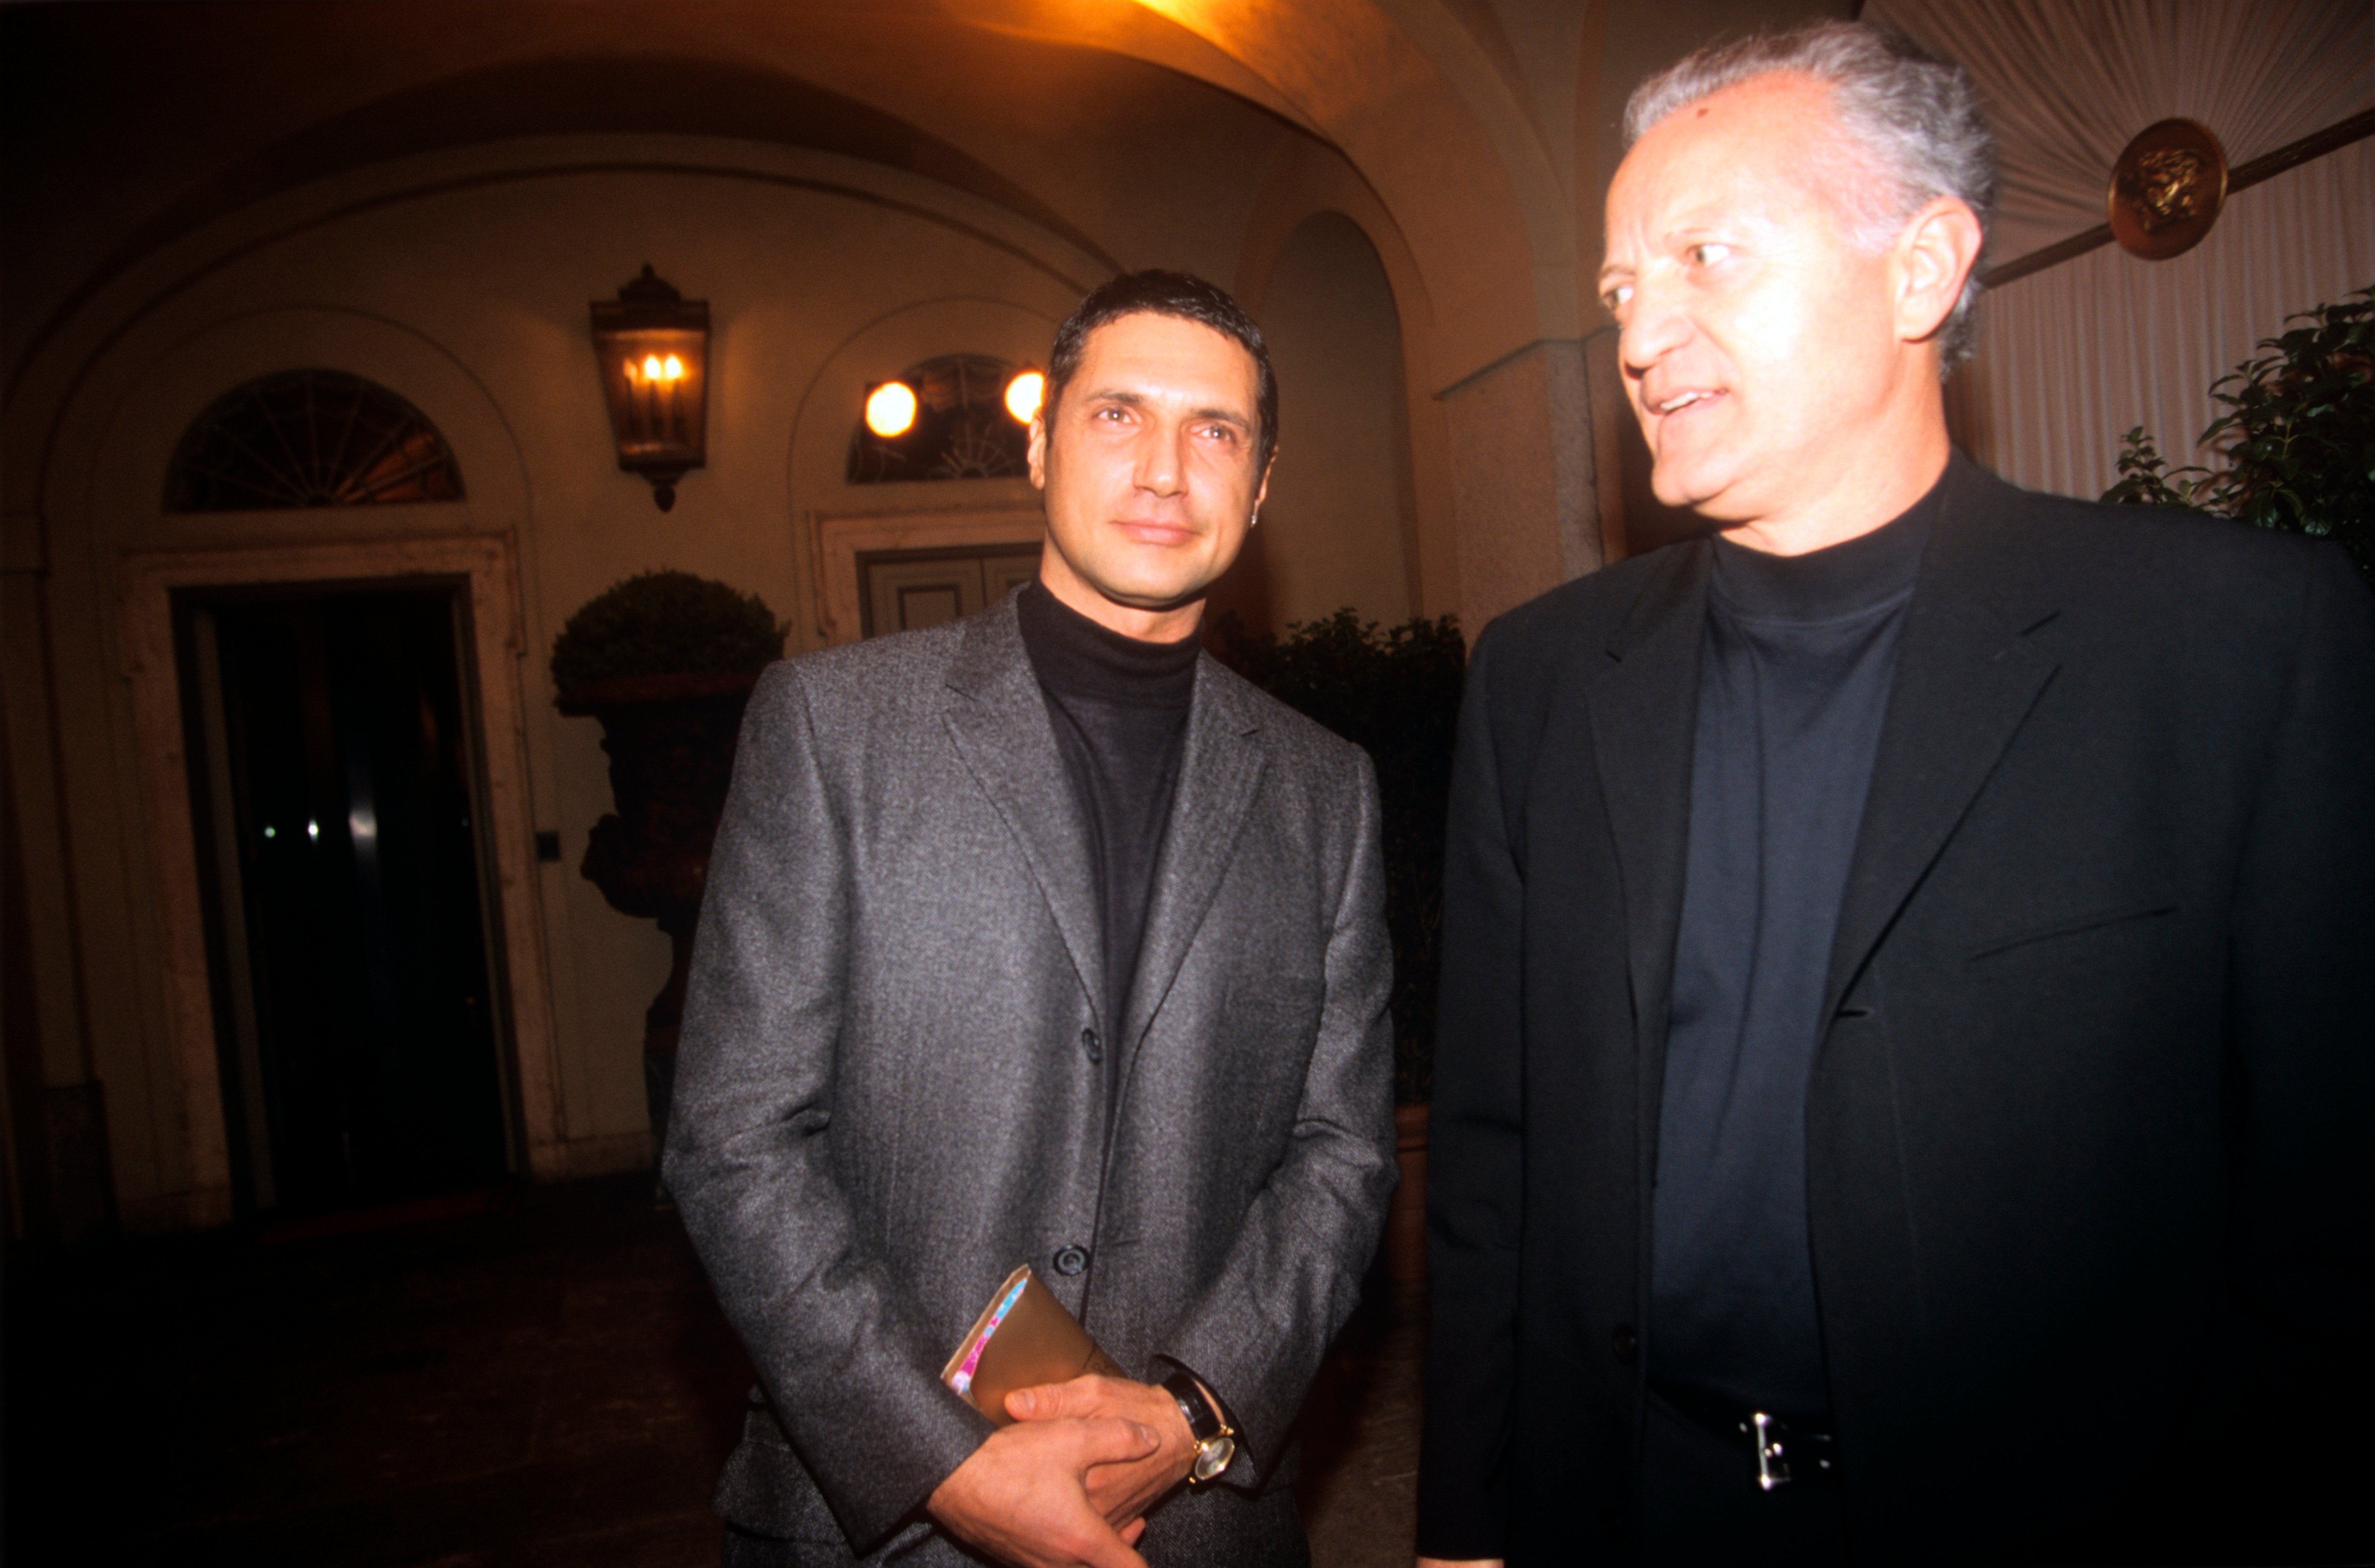 From the left, the fashion designer Antonio D'Amico and Santo Versace, respectively the former partner and the elder brother of the deceased Gianni Versace, are awaiting the beginning of the fashion show dedicated to the spring/summer collection at the via Gesù seat. Milan (Italy), 6th March 1998. (Mondadori Portfolio—Mondadori via Getty Images)